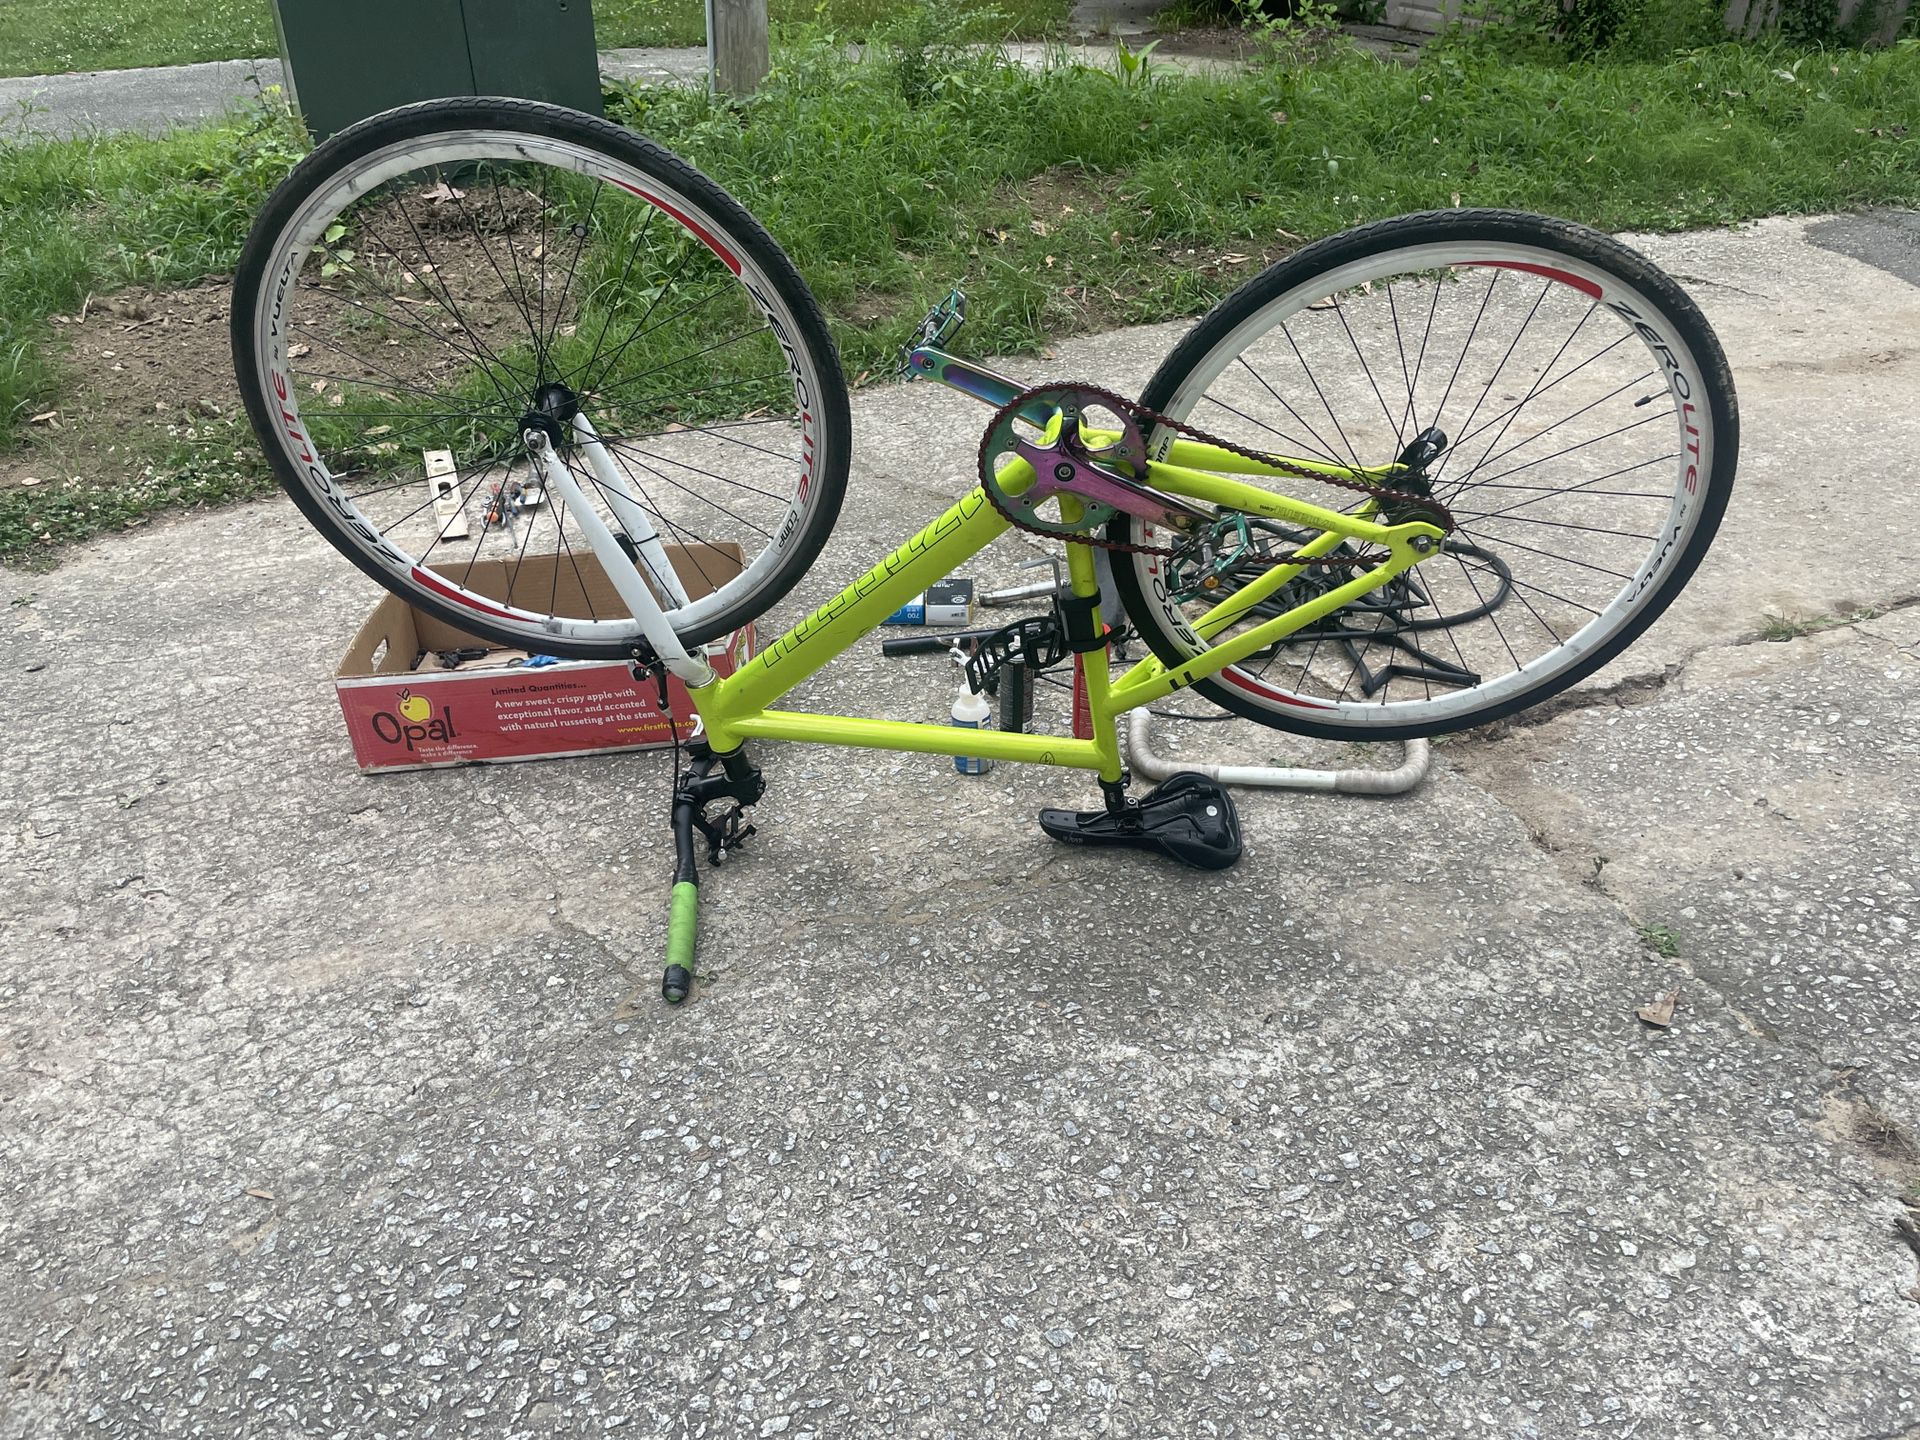 17teeth T1 Frame Custom Bicycle for Sale in Austell, GA OfferUp